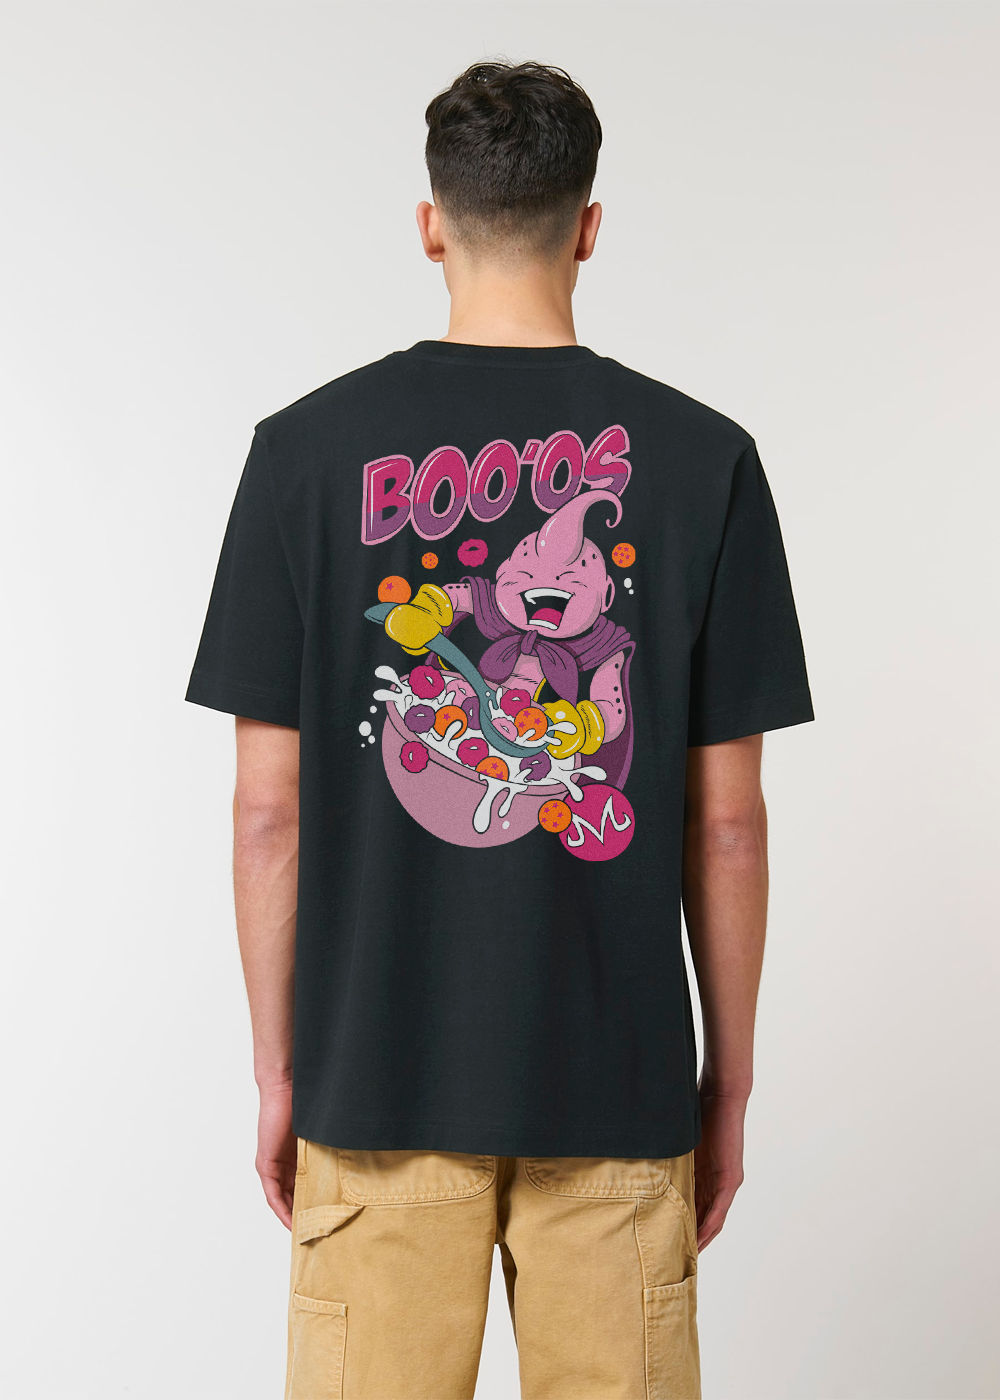 MADE IN JAPAN - BOO'OS® BLACK T-SHIRT